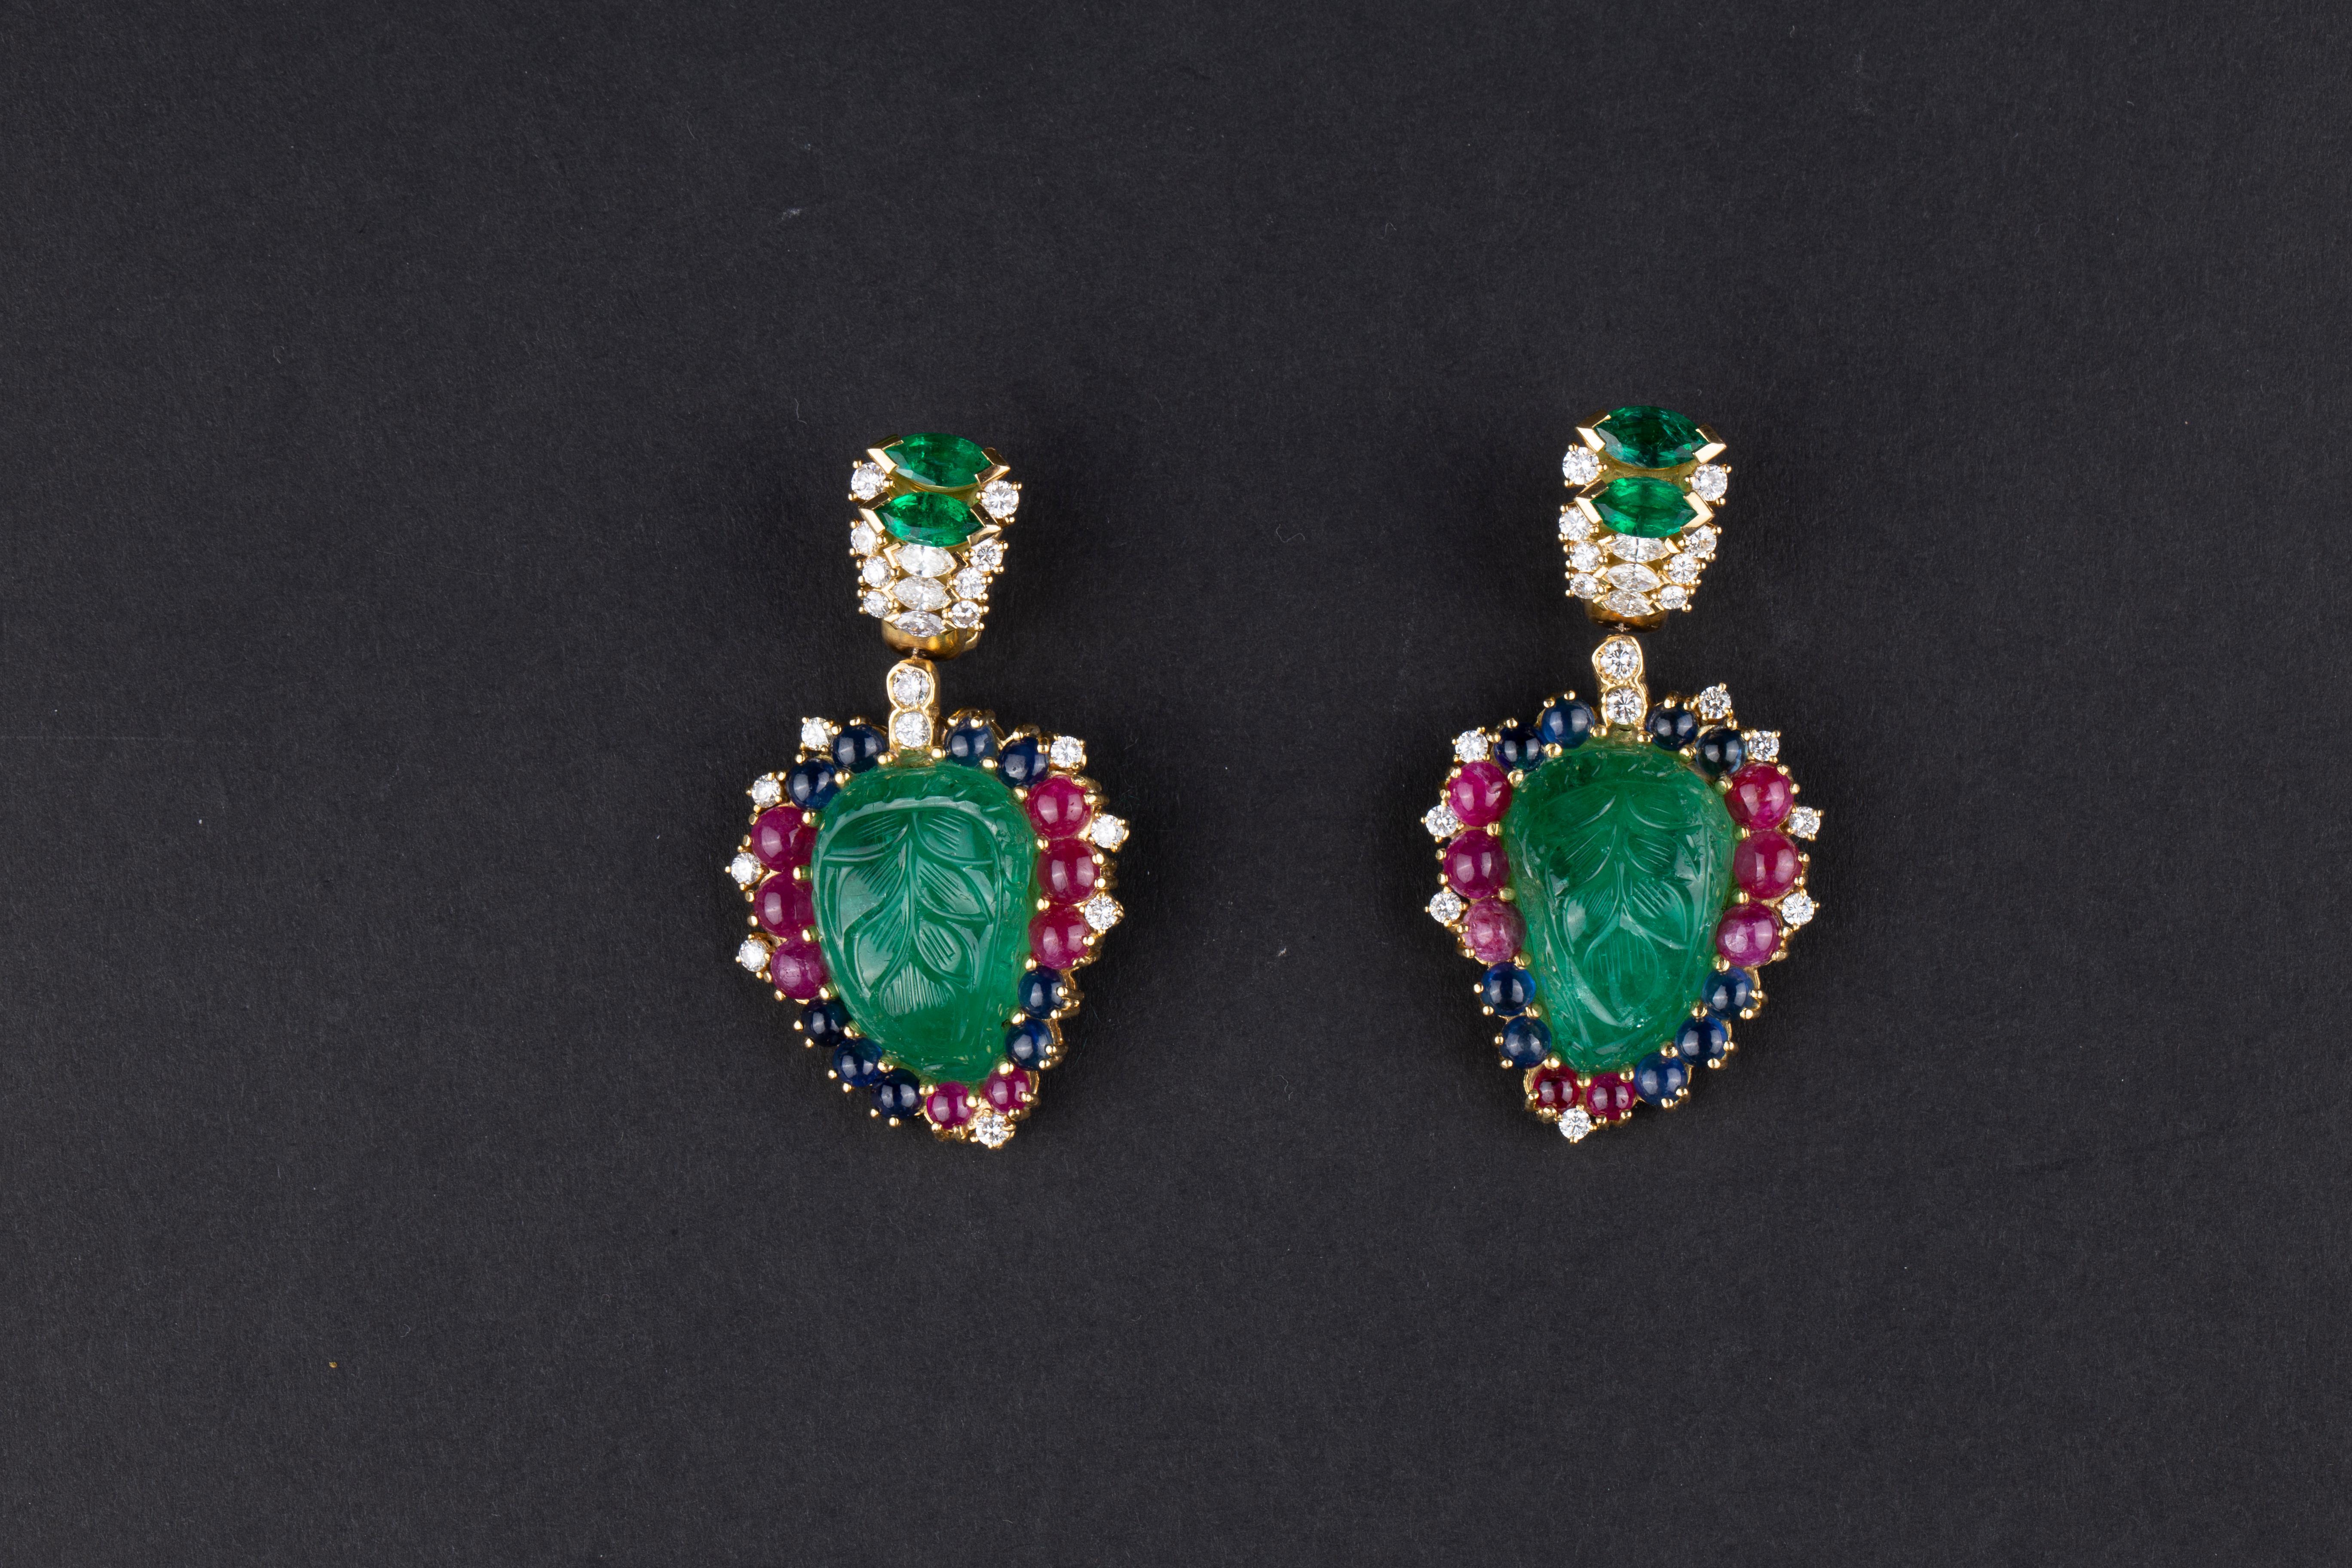 A pair of 18k yellow gold ear pendants suspending two carved emeralds (80cts total), marquise emeralds (2.5 carats total), diamonds (1.8 carats), rubies, and sapphires, ear-pendants. Made in Italy, circa 1980.